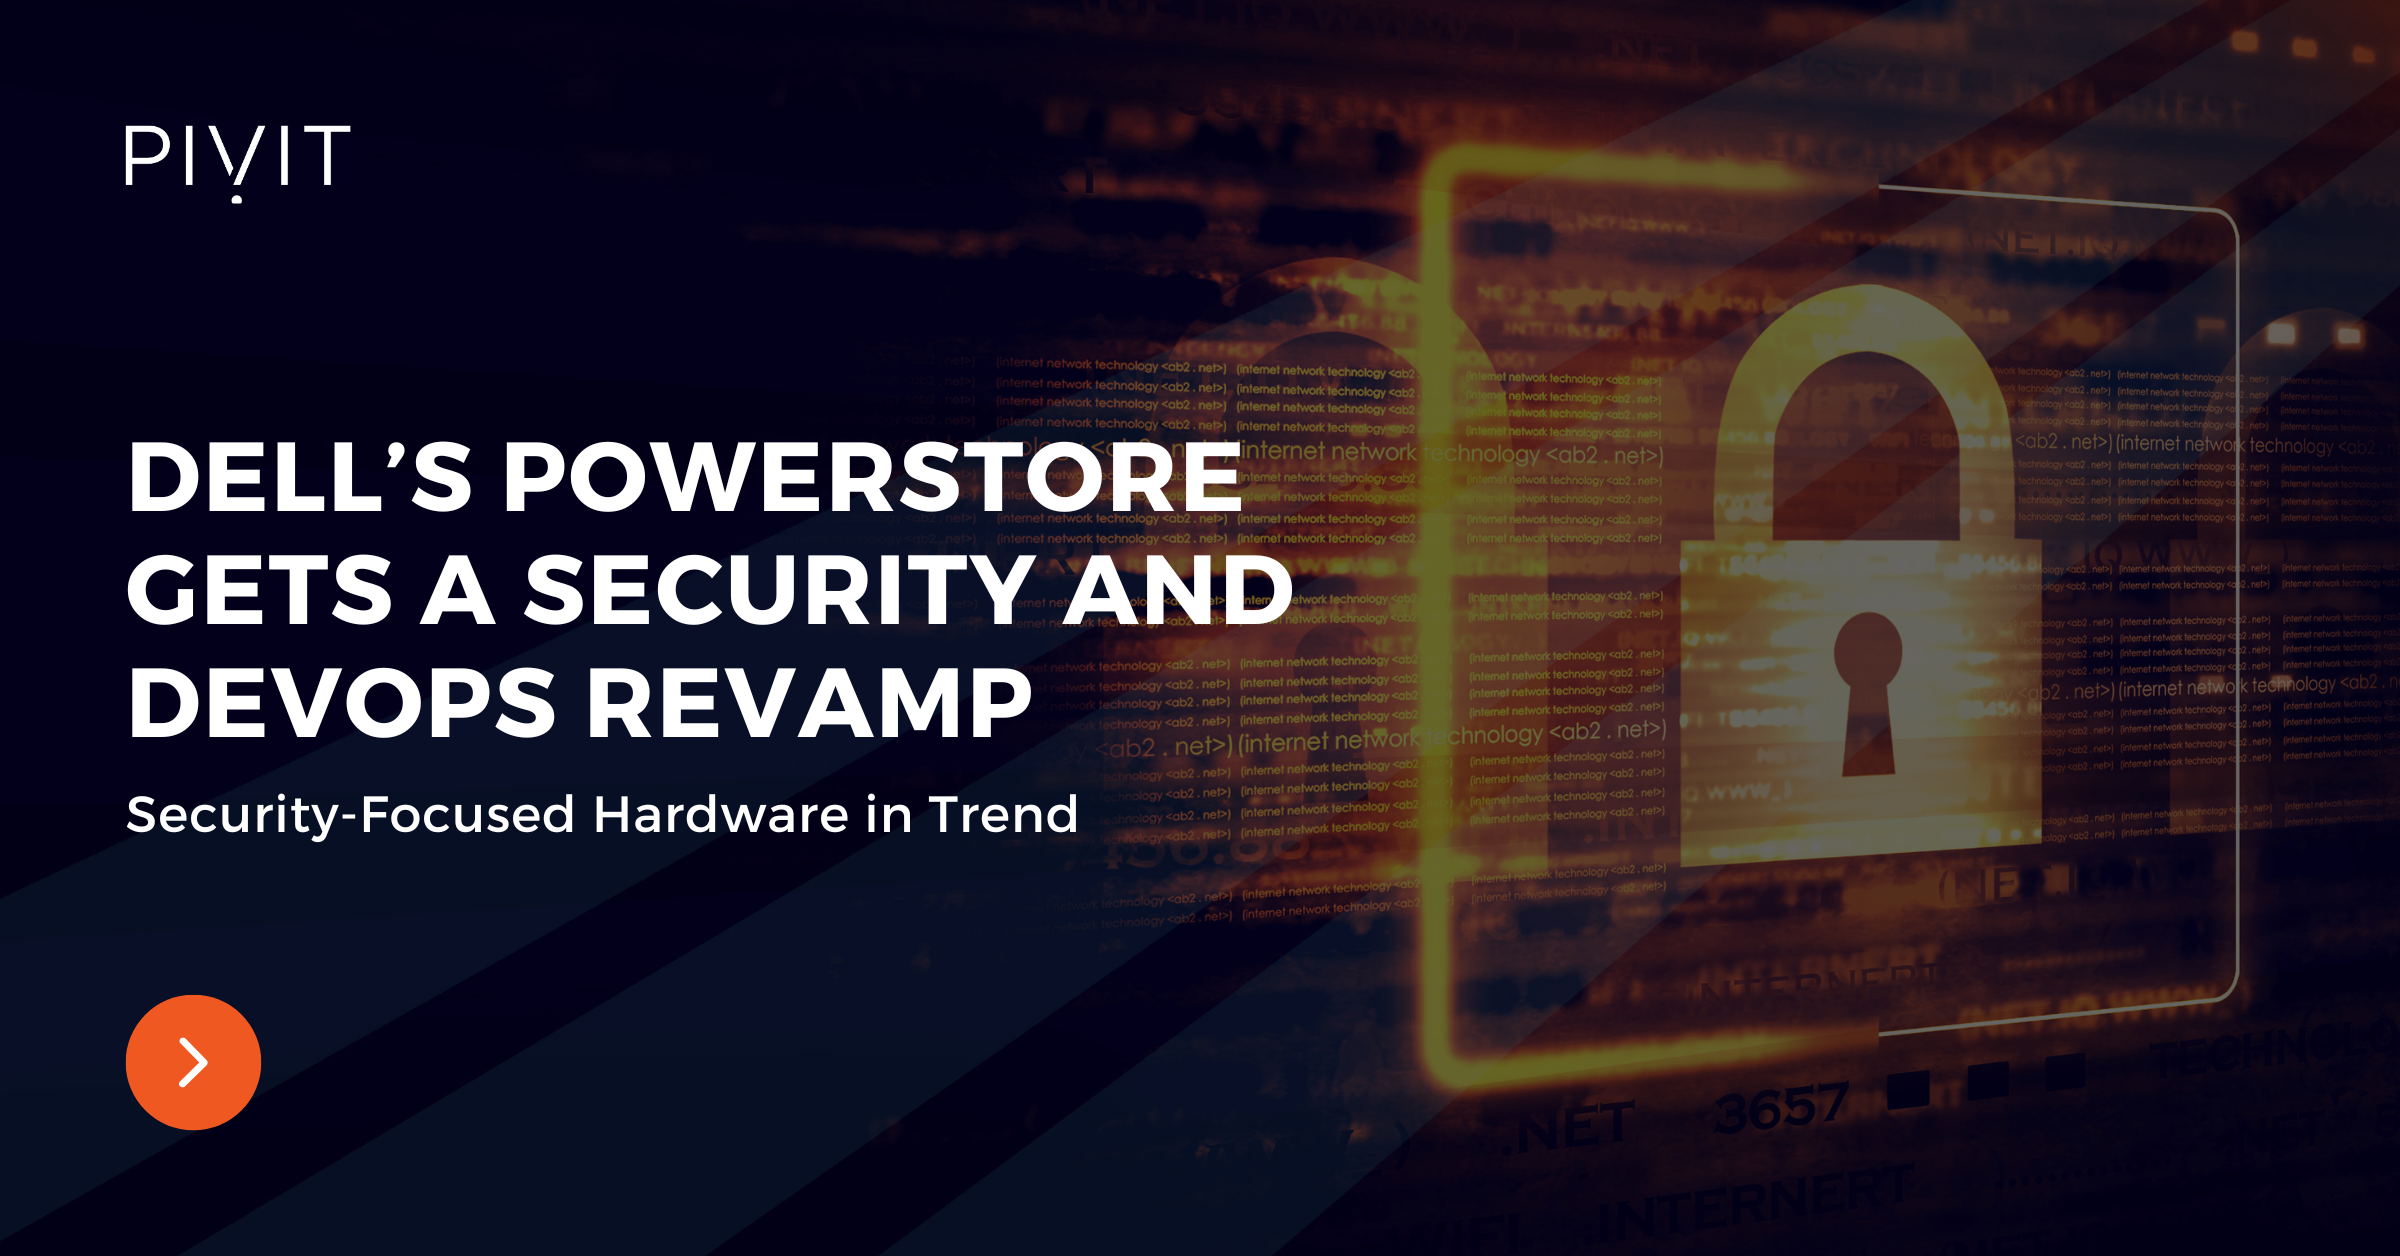 Dell’s PowerStore Gets a Security and DevOps Revamp